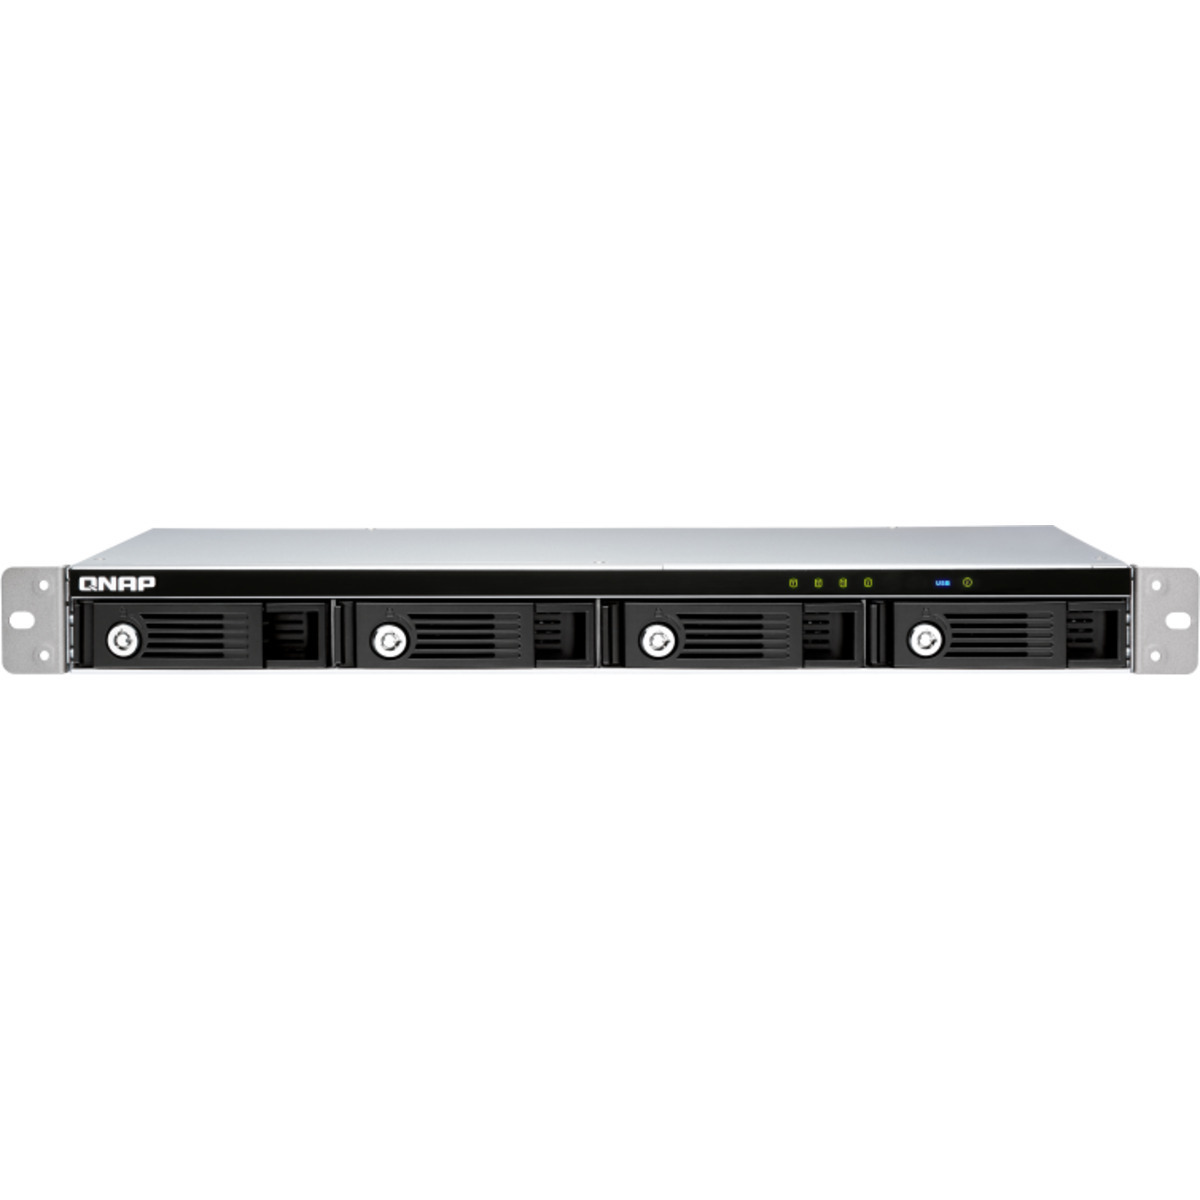 QNAP TR-004U External Expansion Drive 16tb 4-Bay RackMount Multimedia / Power User / Business Expansion Enclosure 4x4tb Seagate IronWolf Pro ST4000NT001 3.5 7200rpm SATA 6Gb/s HDD NAS Class Drives Installed - Burn-In Tested TR-004U External Expansion Drive